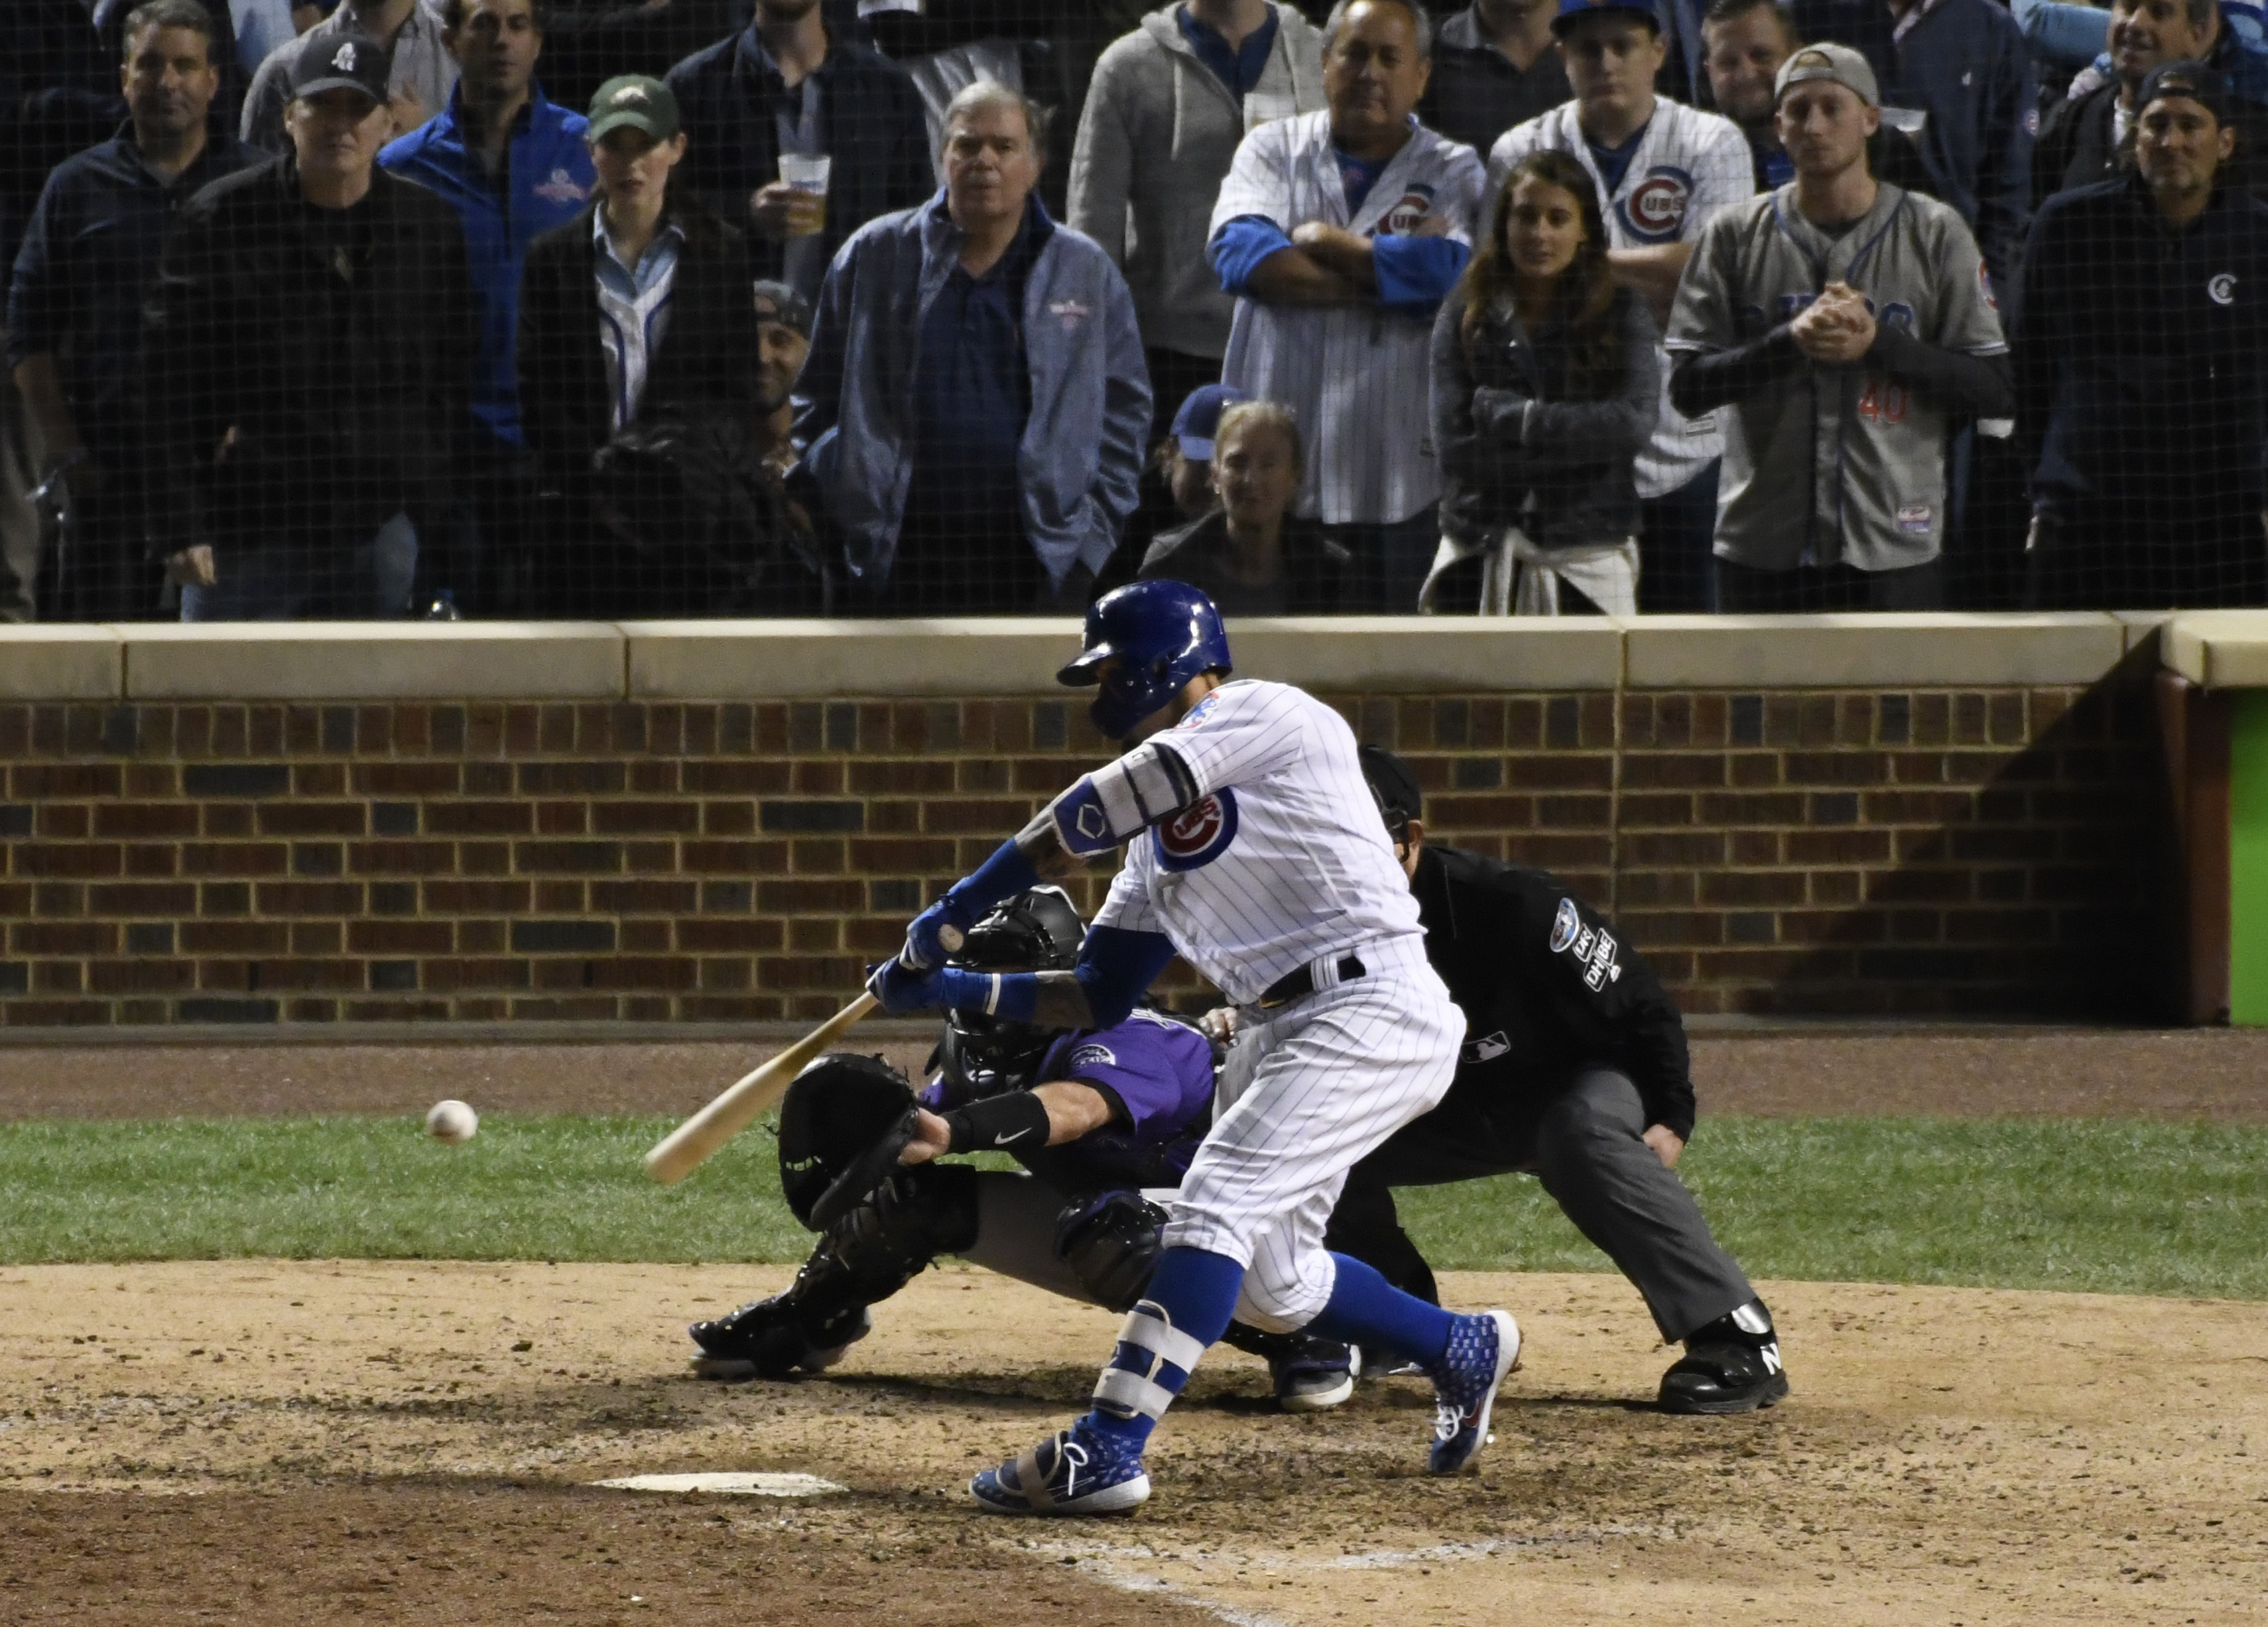 For Cubs, season ends on sour note with loss to Rockies